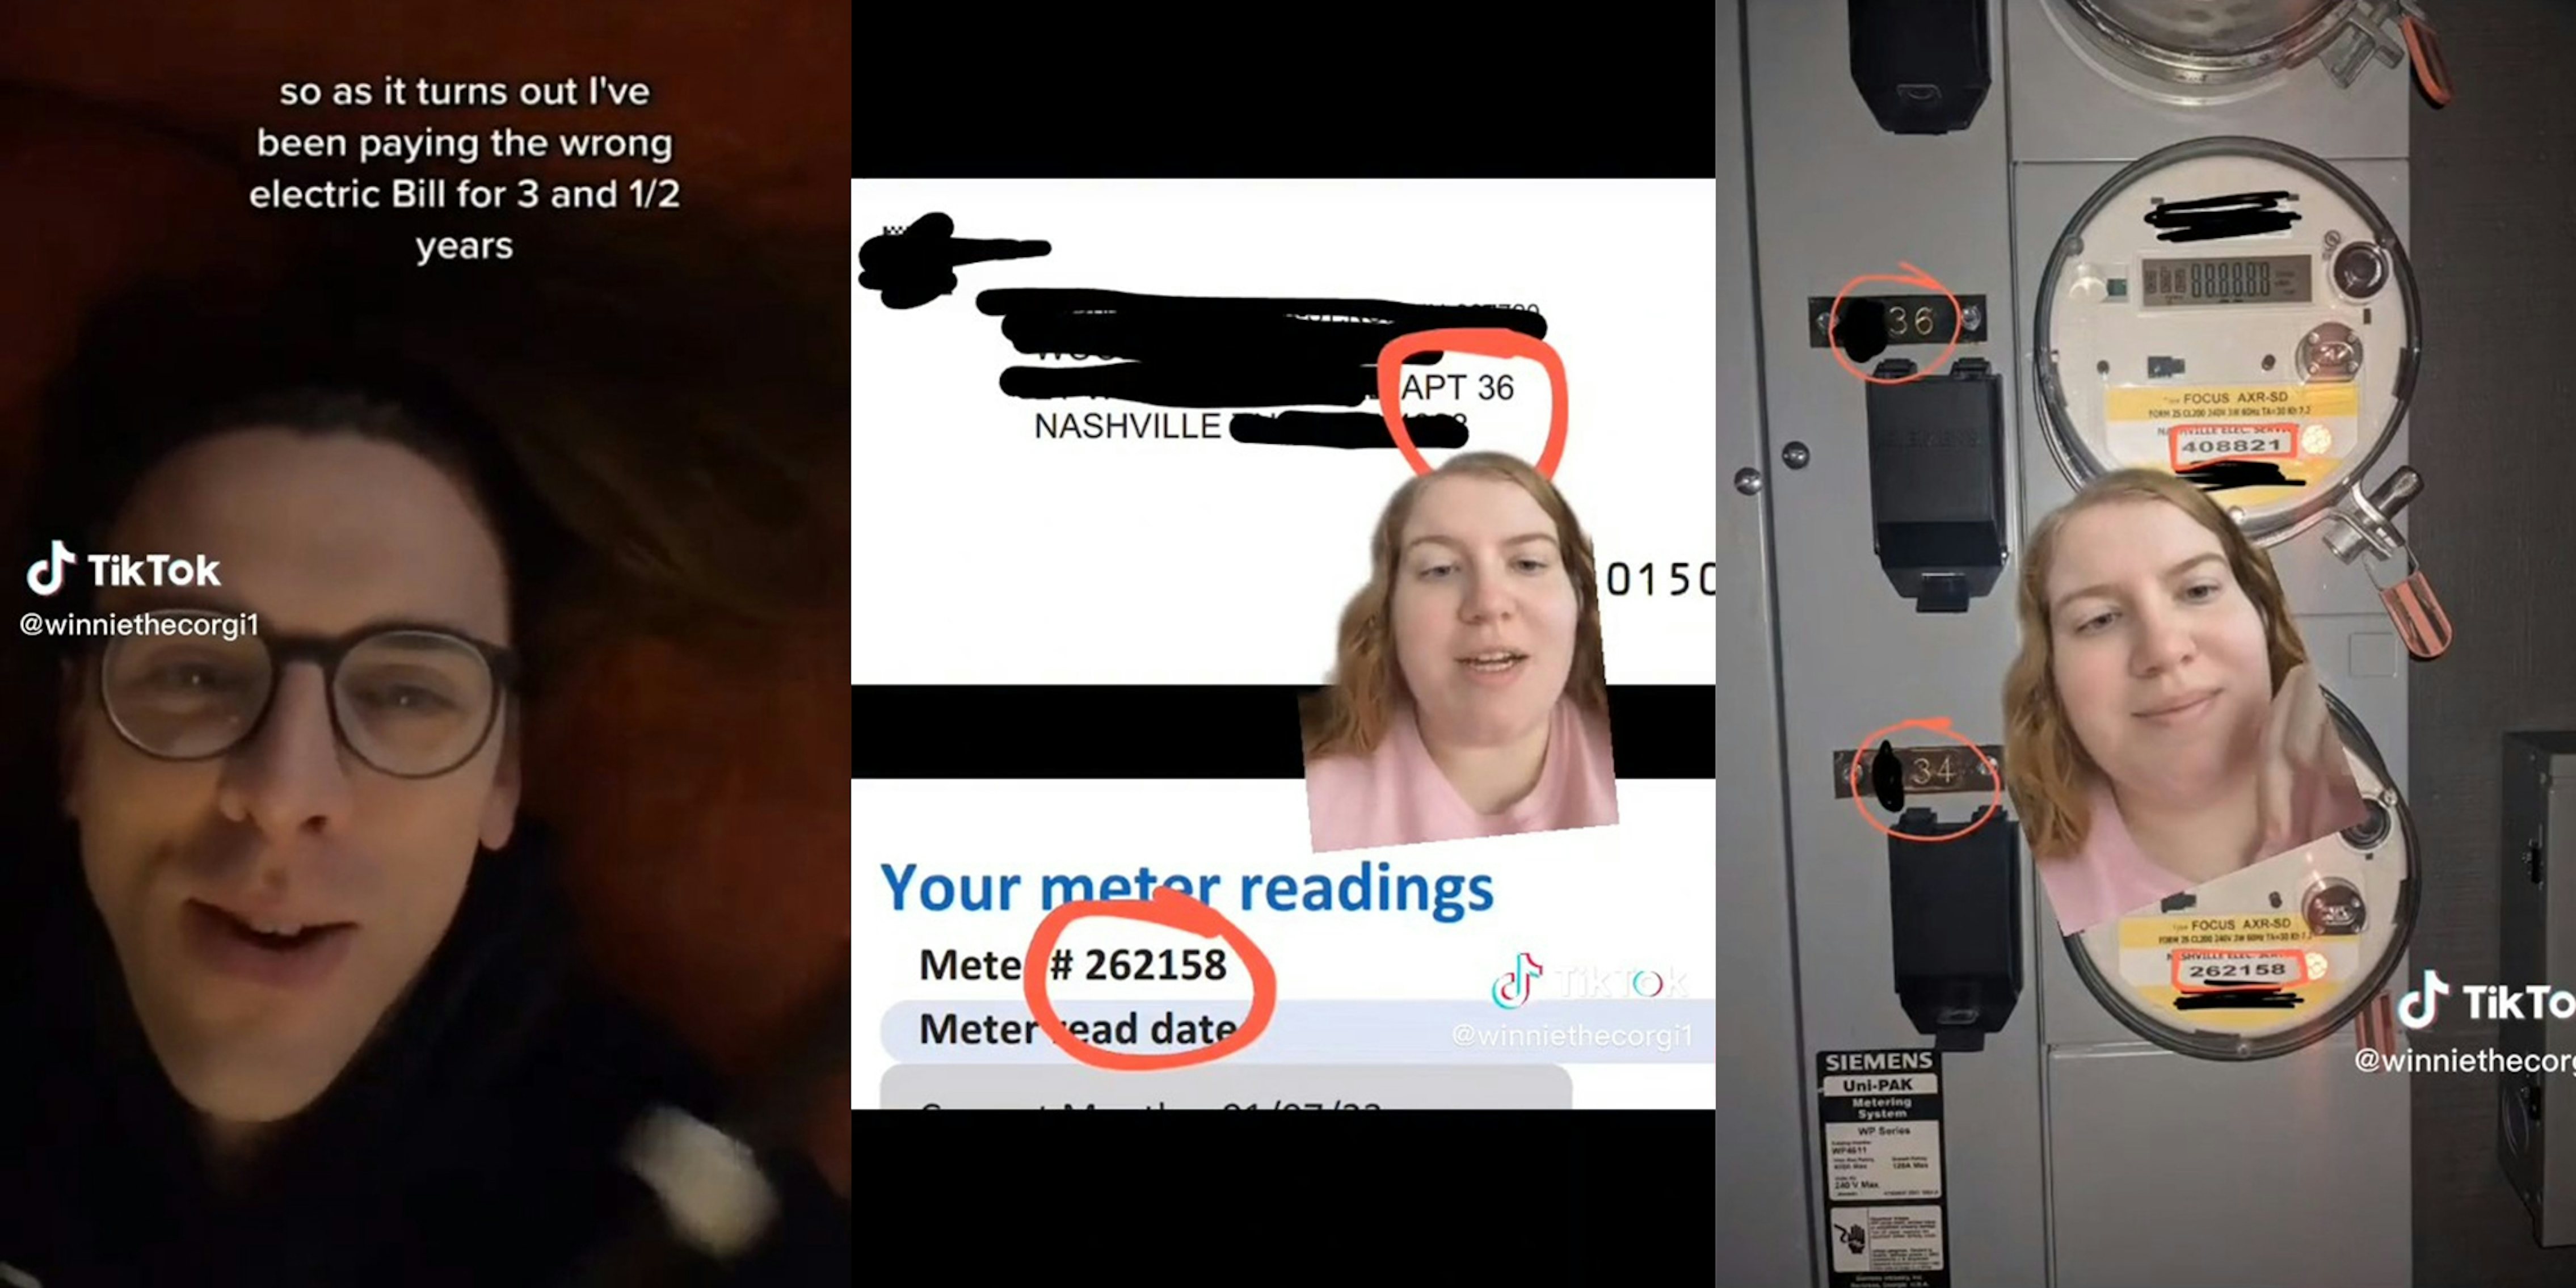 Renter finds out she's been paying her neighbor's electric bill after checking apartment meter